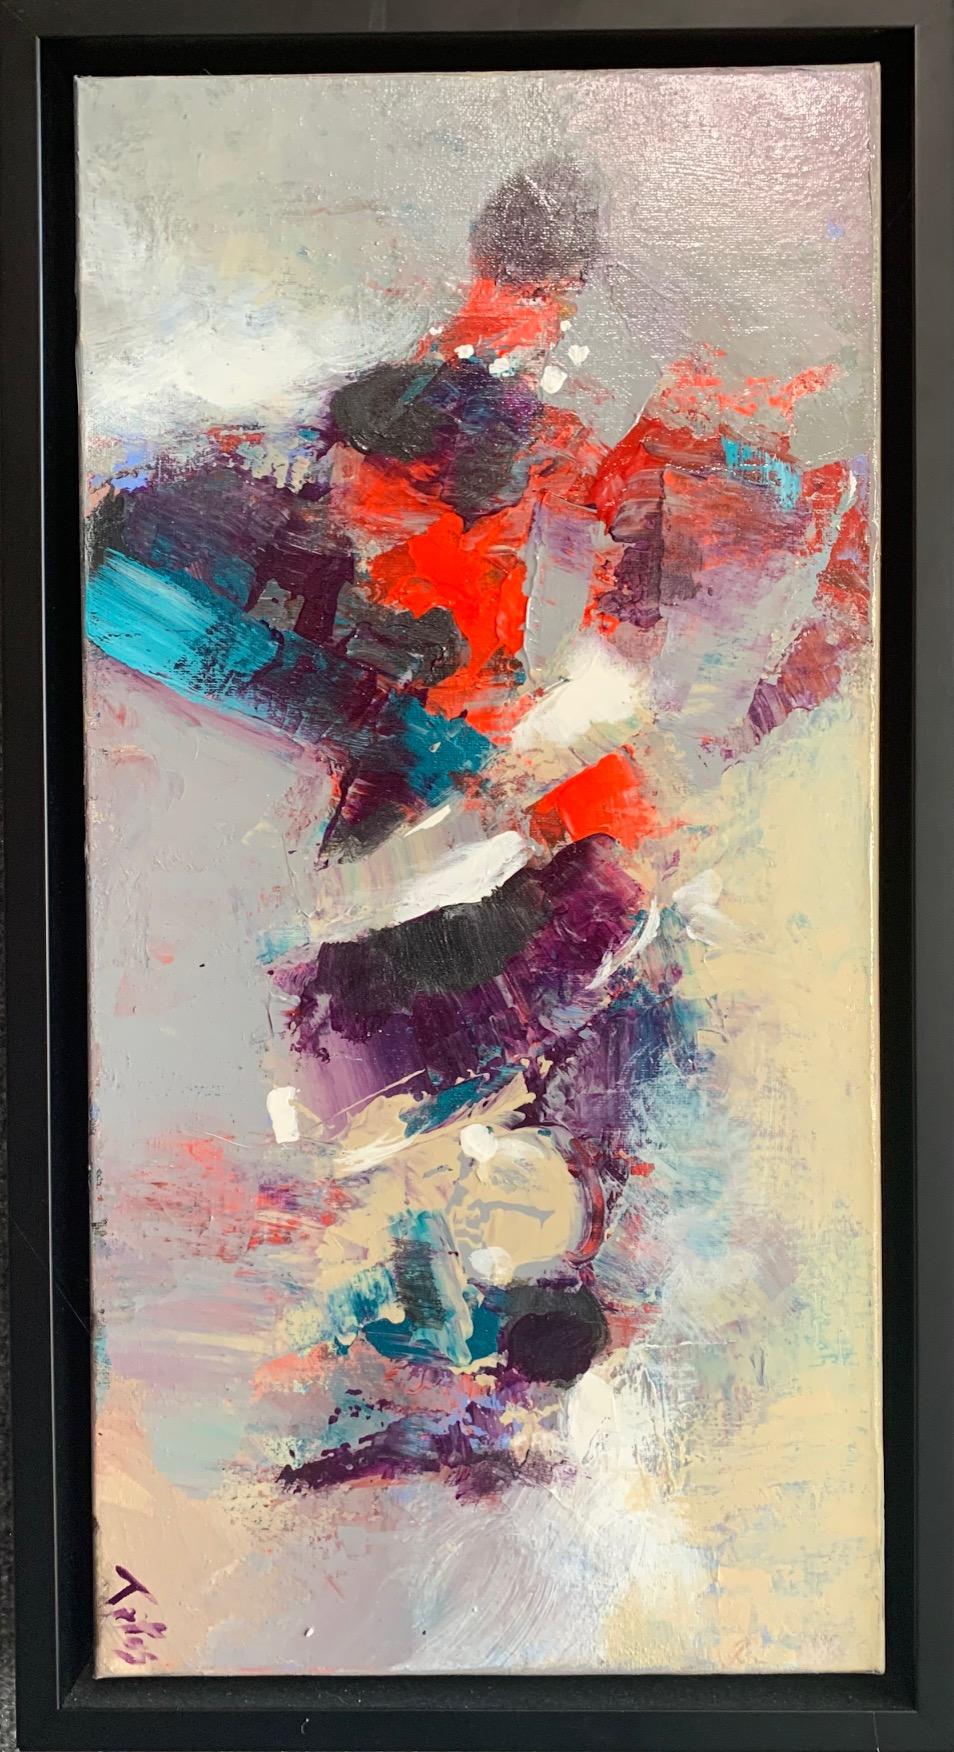 Mary Titus is widely recognized in Carmel, CA, as a top abstract painter.
Artist & teacher Mary Titus was born in Florida in 1950, she moved to Carmel, California in 1983. 
She was told she was an artist at a very young age. Started selling at age